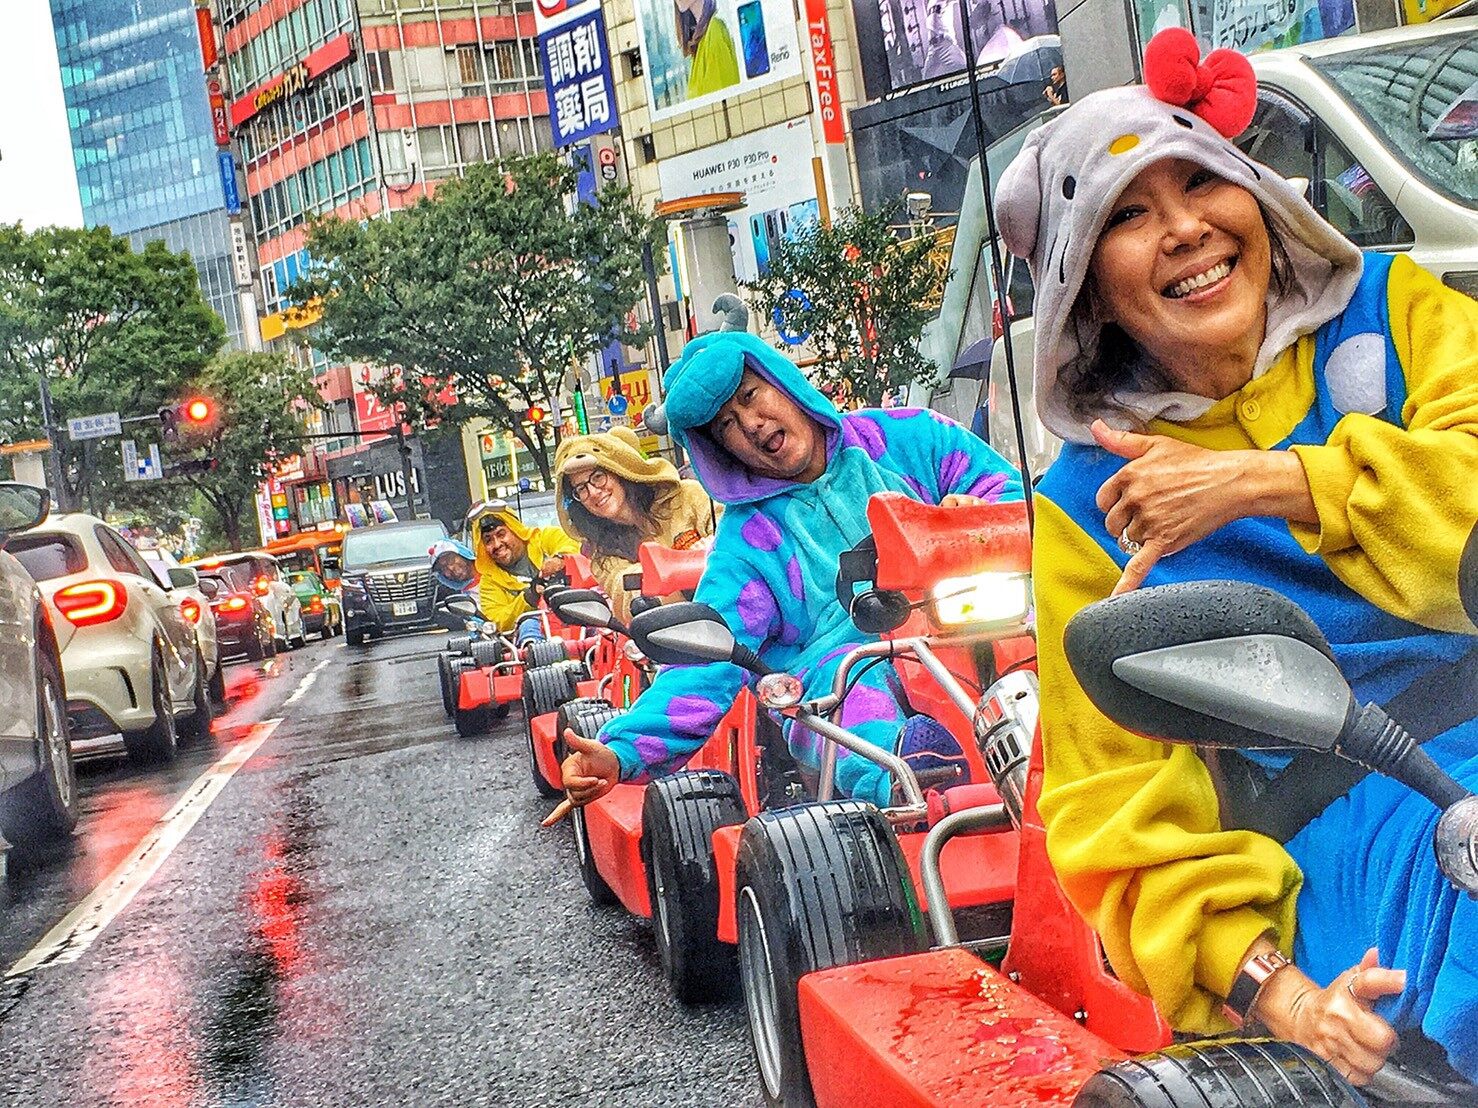 Public Road Go Kart Tour 1 Hour Course From Shibuya Things To Do In Tokyo Japan Hisgo Tic